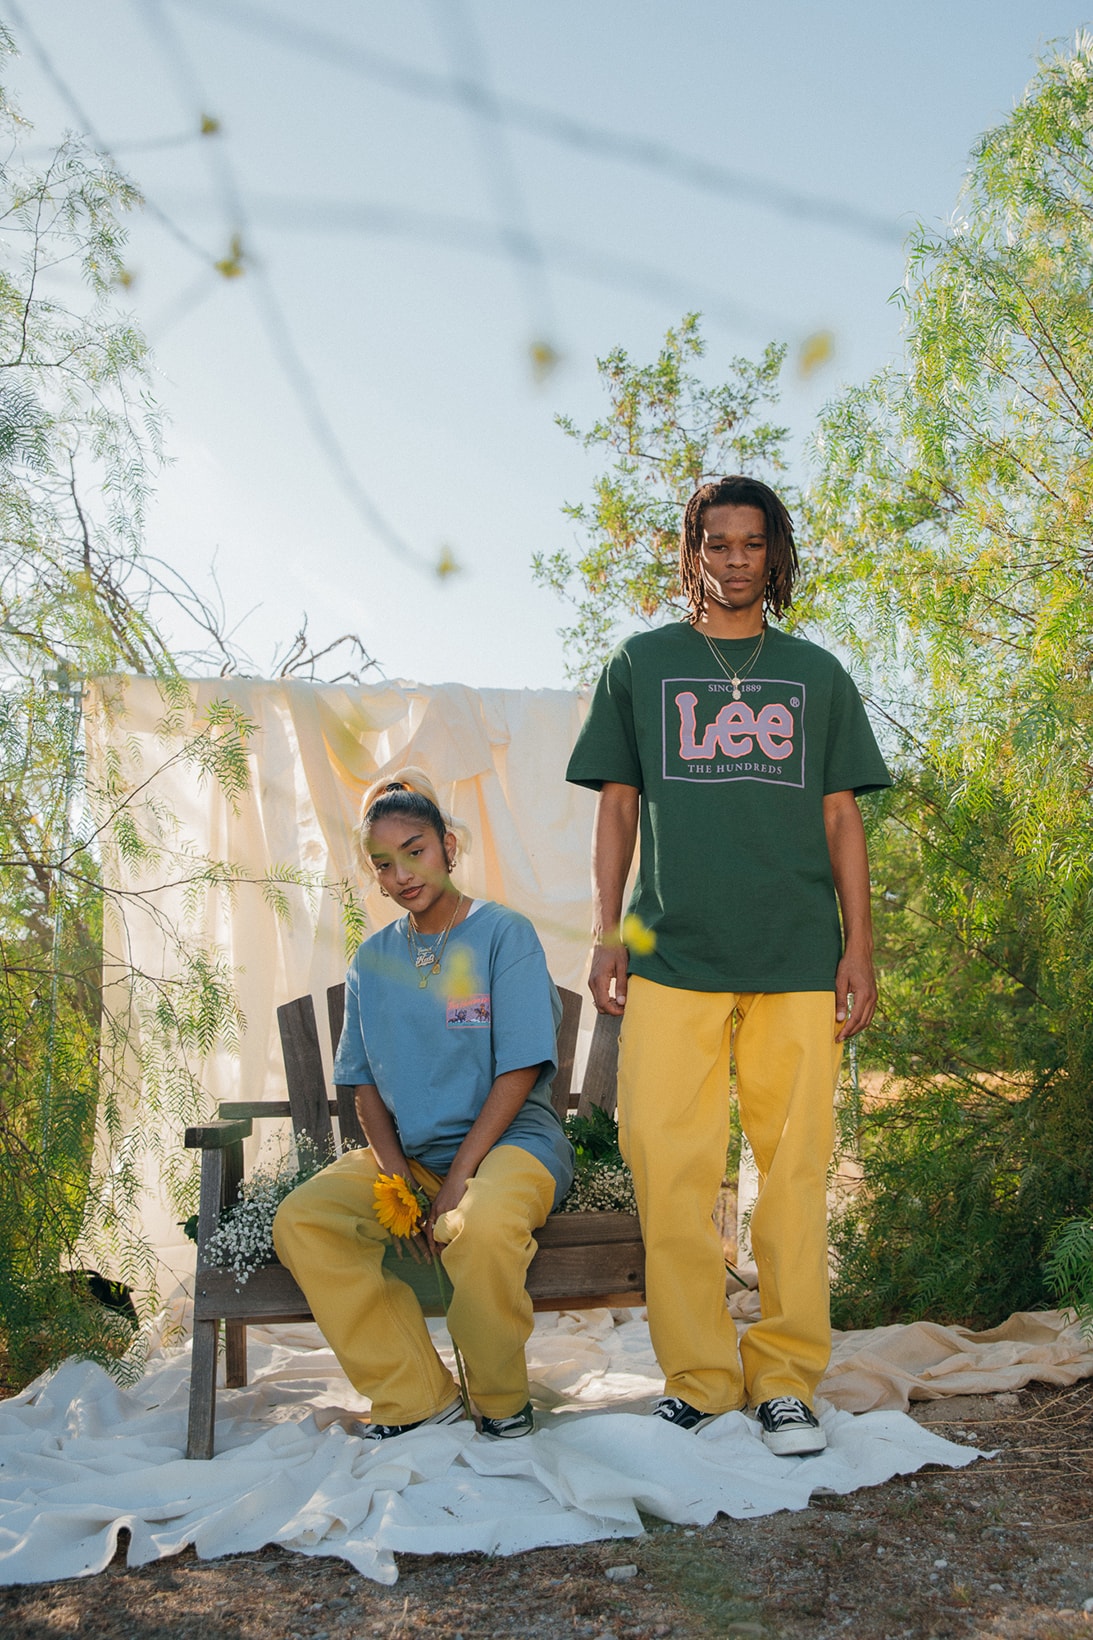 Lee Jeans and The Hundreds launch second capsule collection